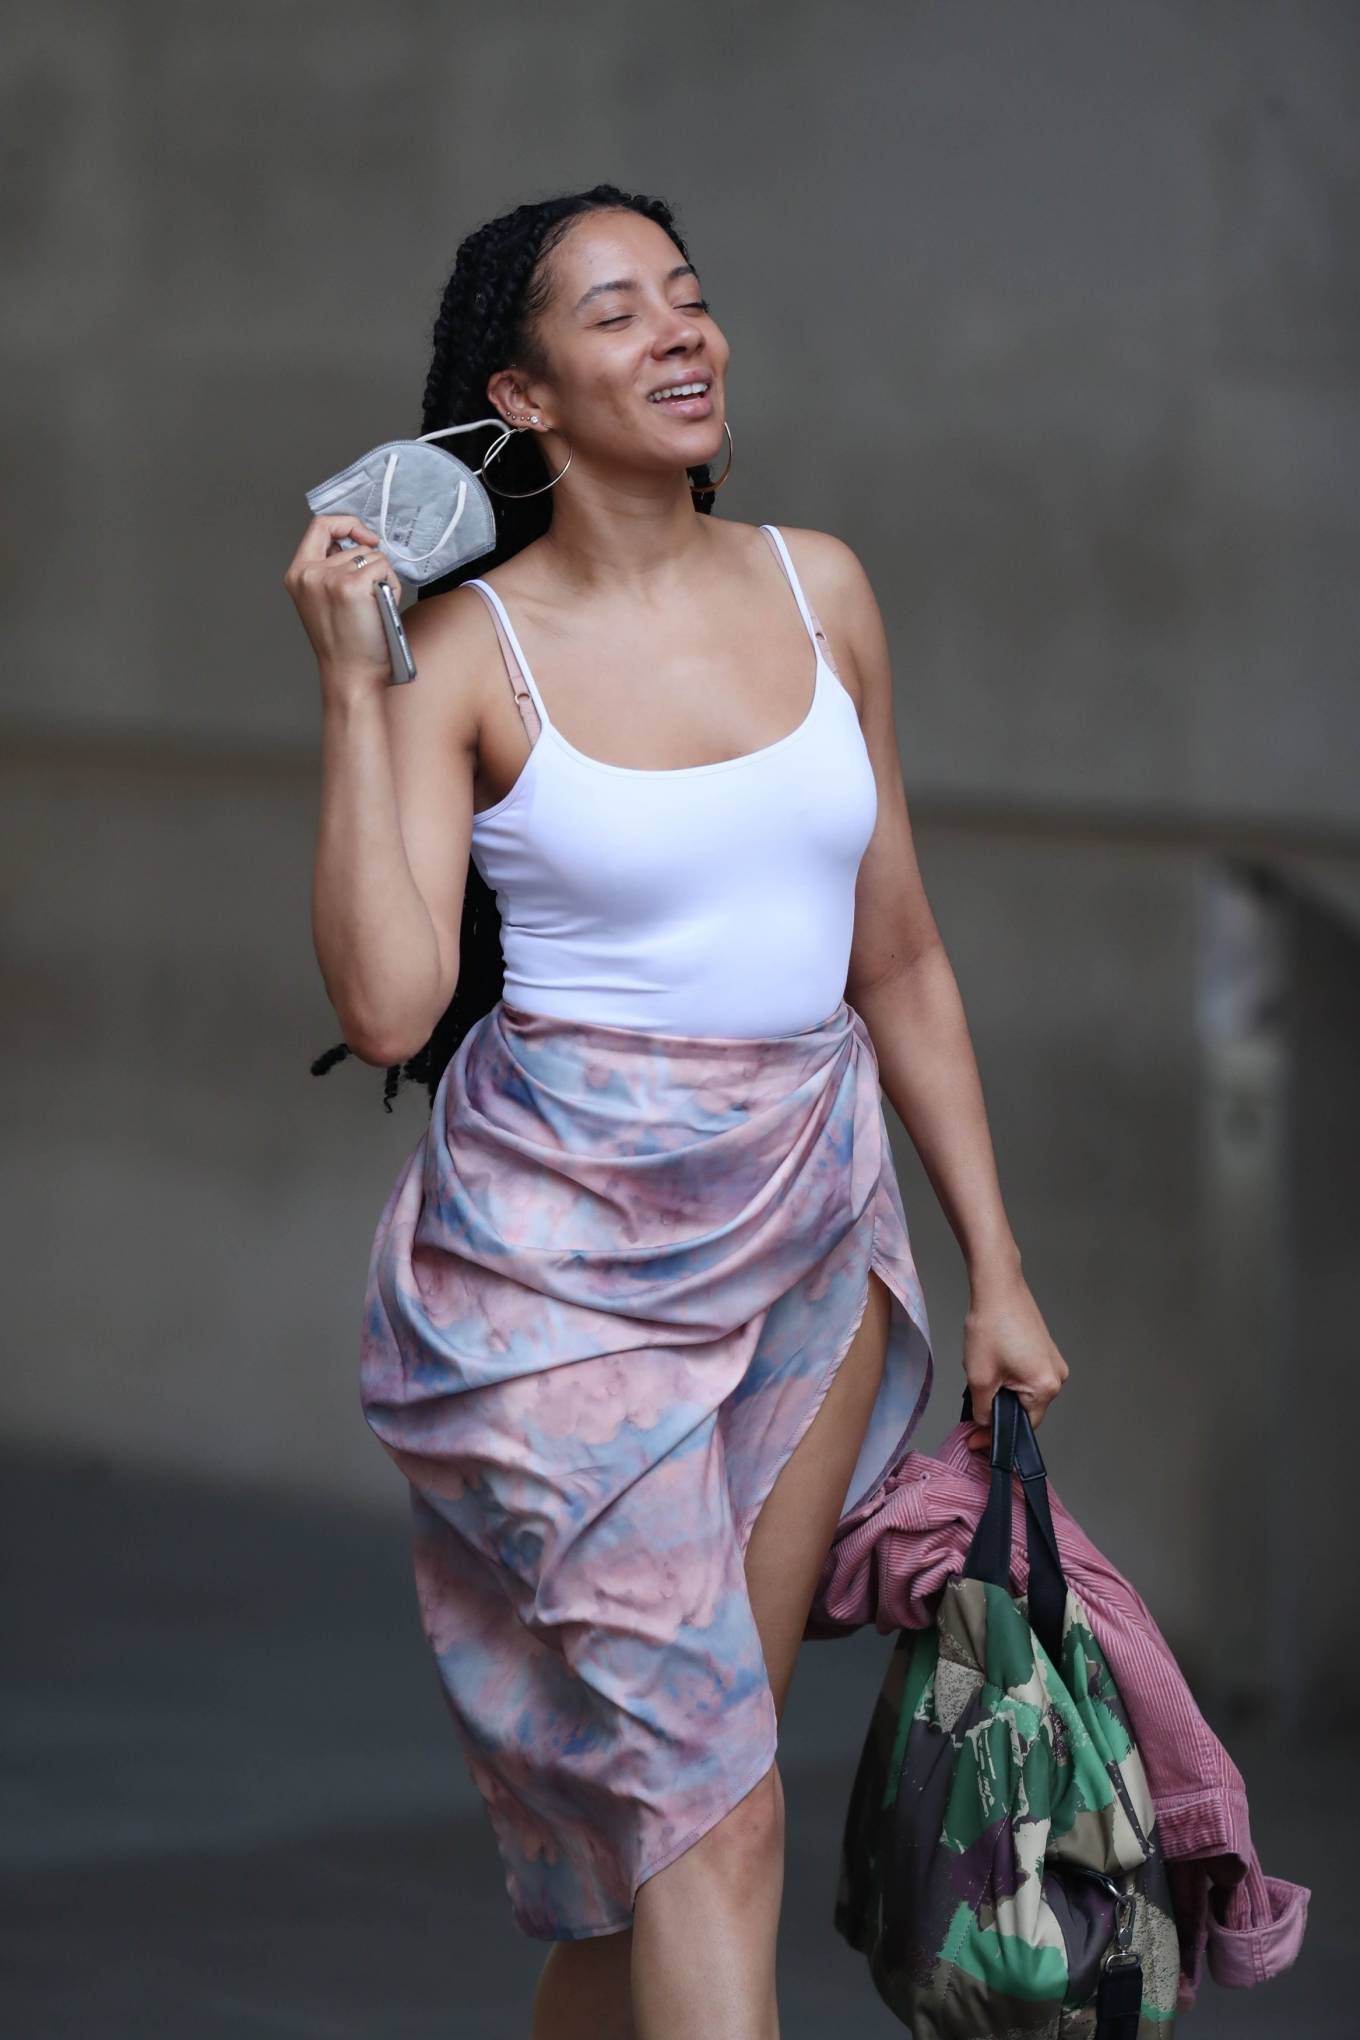 Yasmin Evan â€“ Looking cute while leaving the BBC Broadcasting House in London